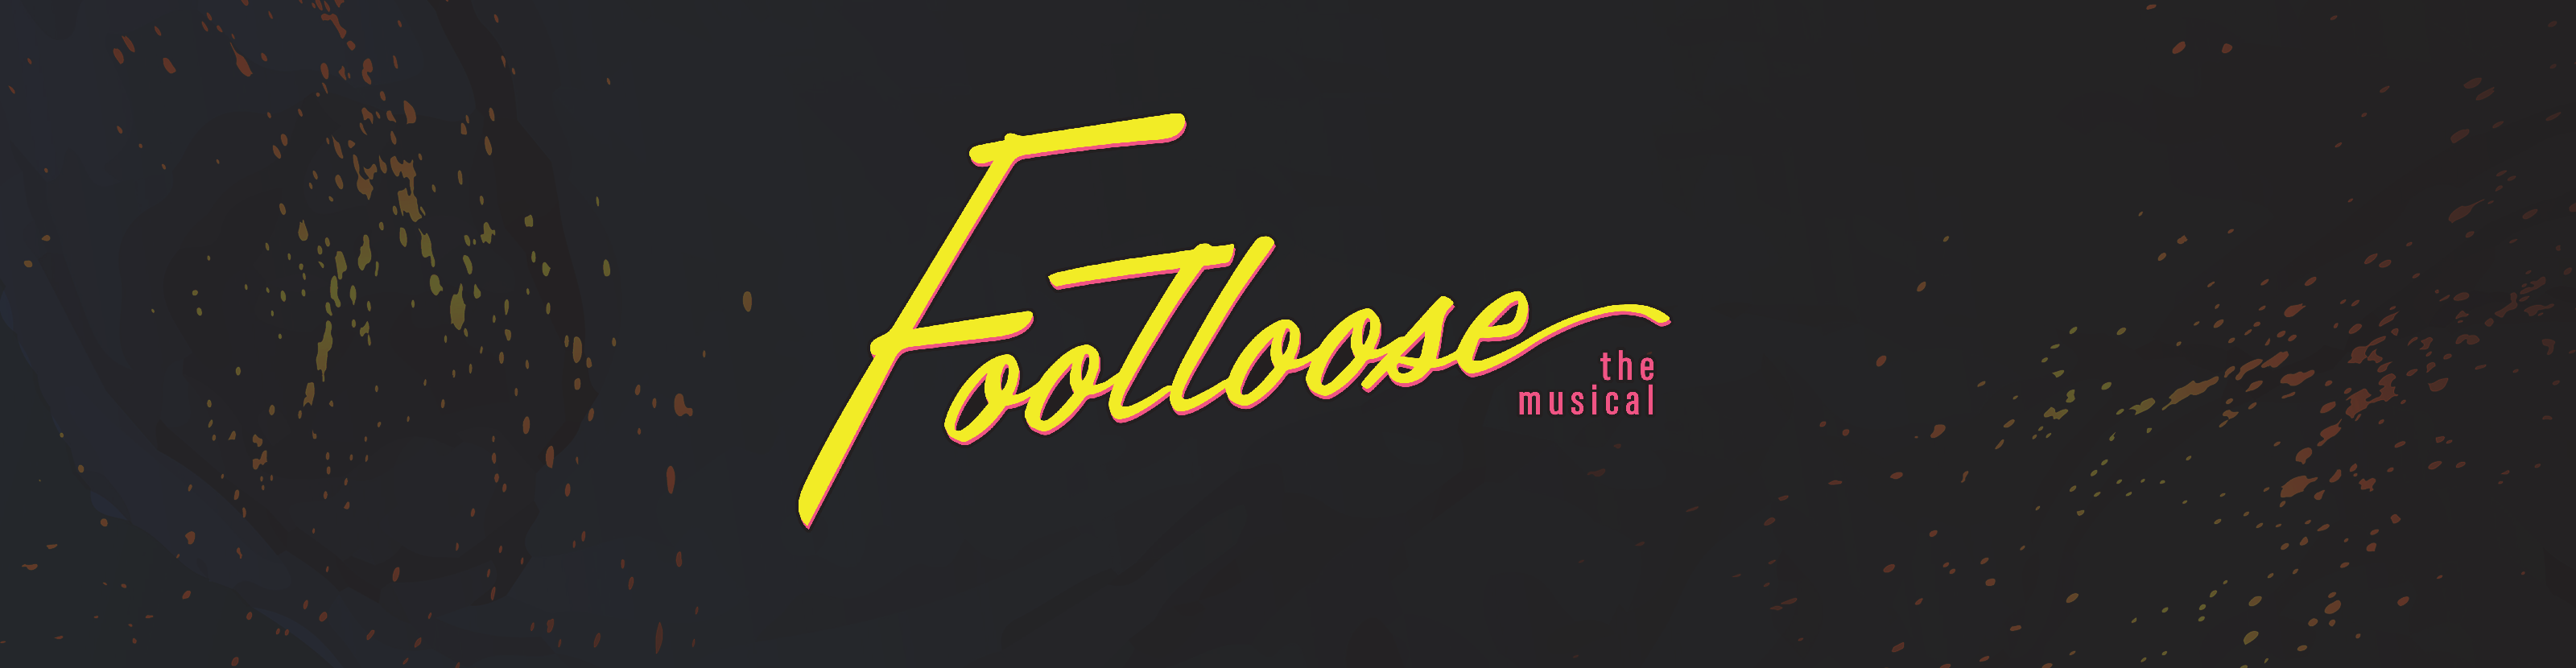 Banner that says Footloose the musical